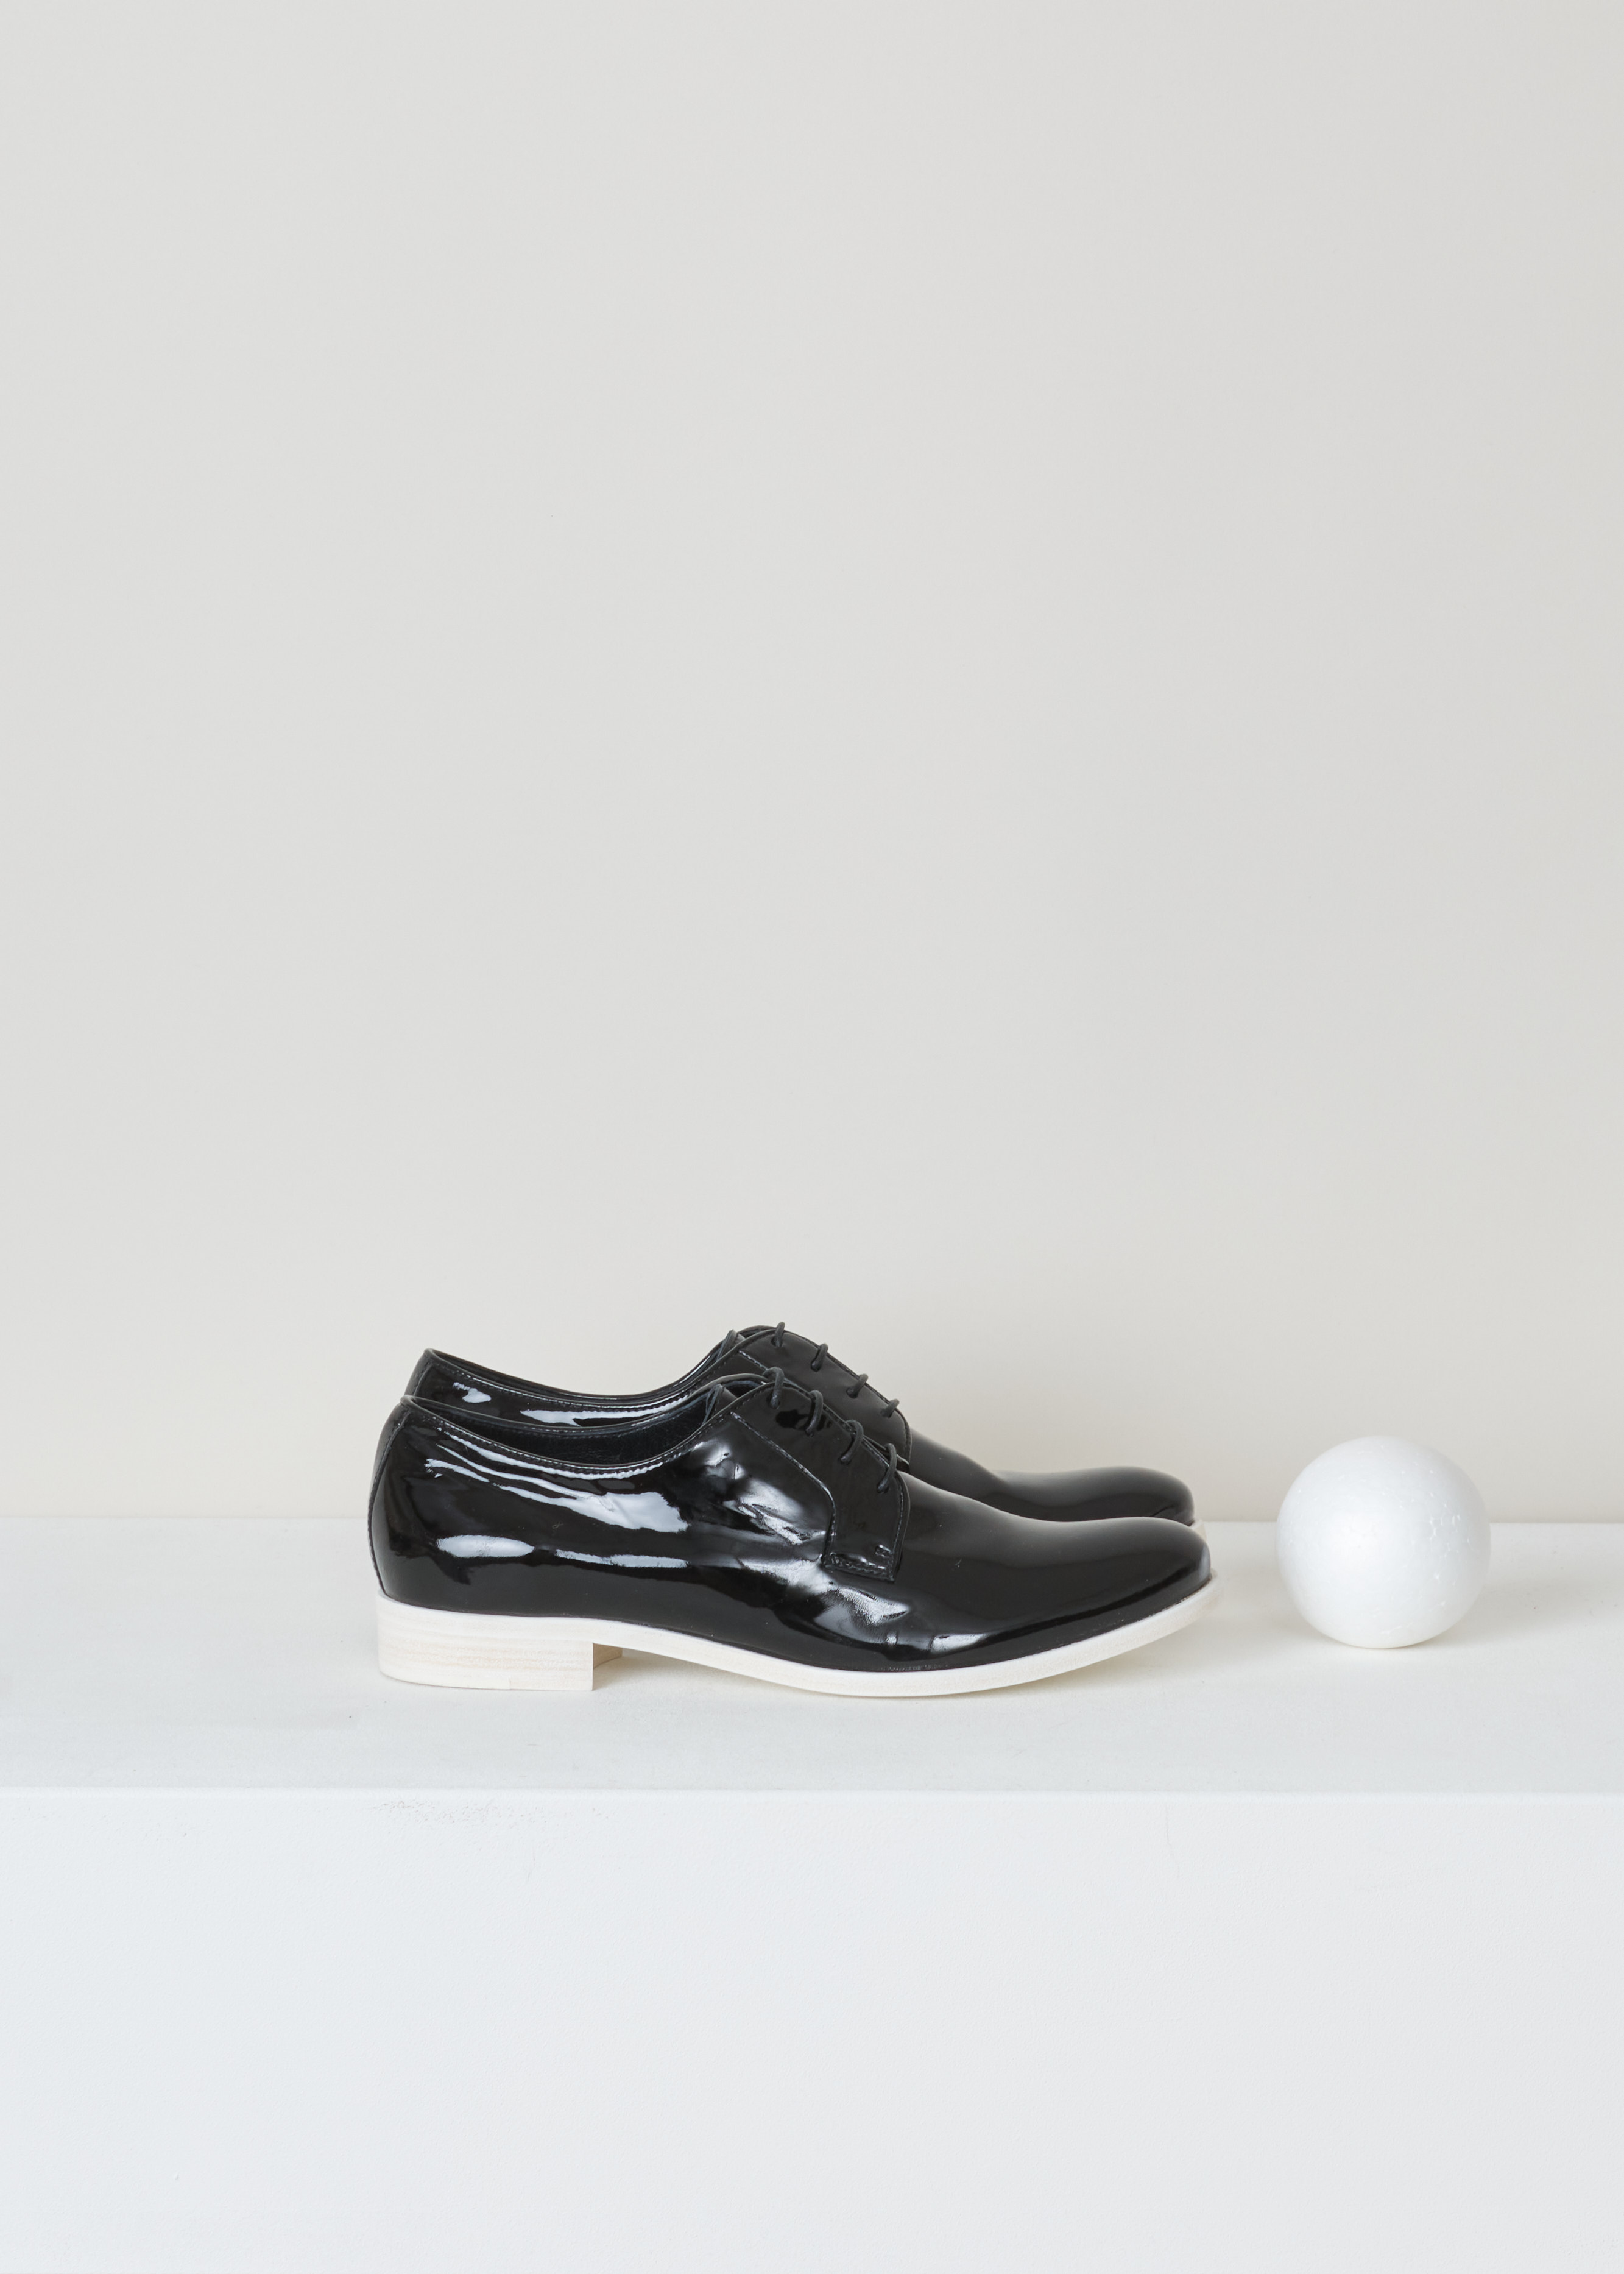 Jil Sander Patent leather lace-up shoes JS18361_999 black side. Black patent leather lace-up shoe with a rounded toe and a white leather sole.